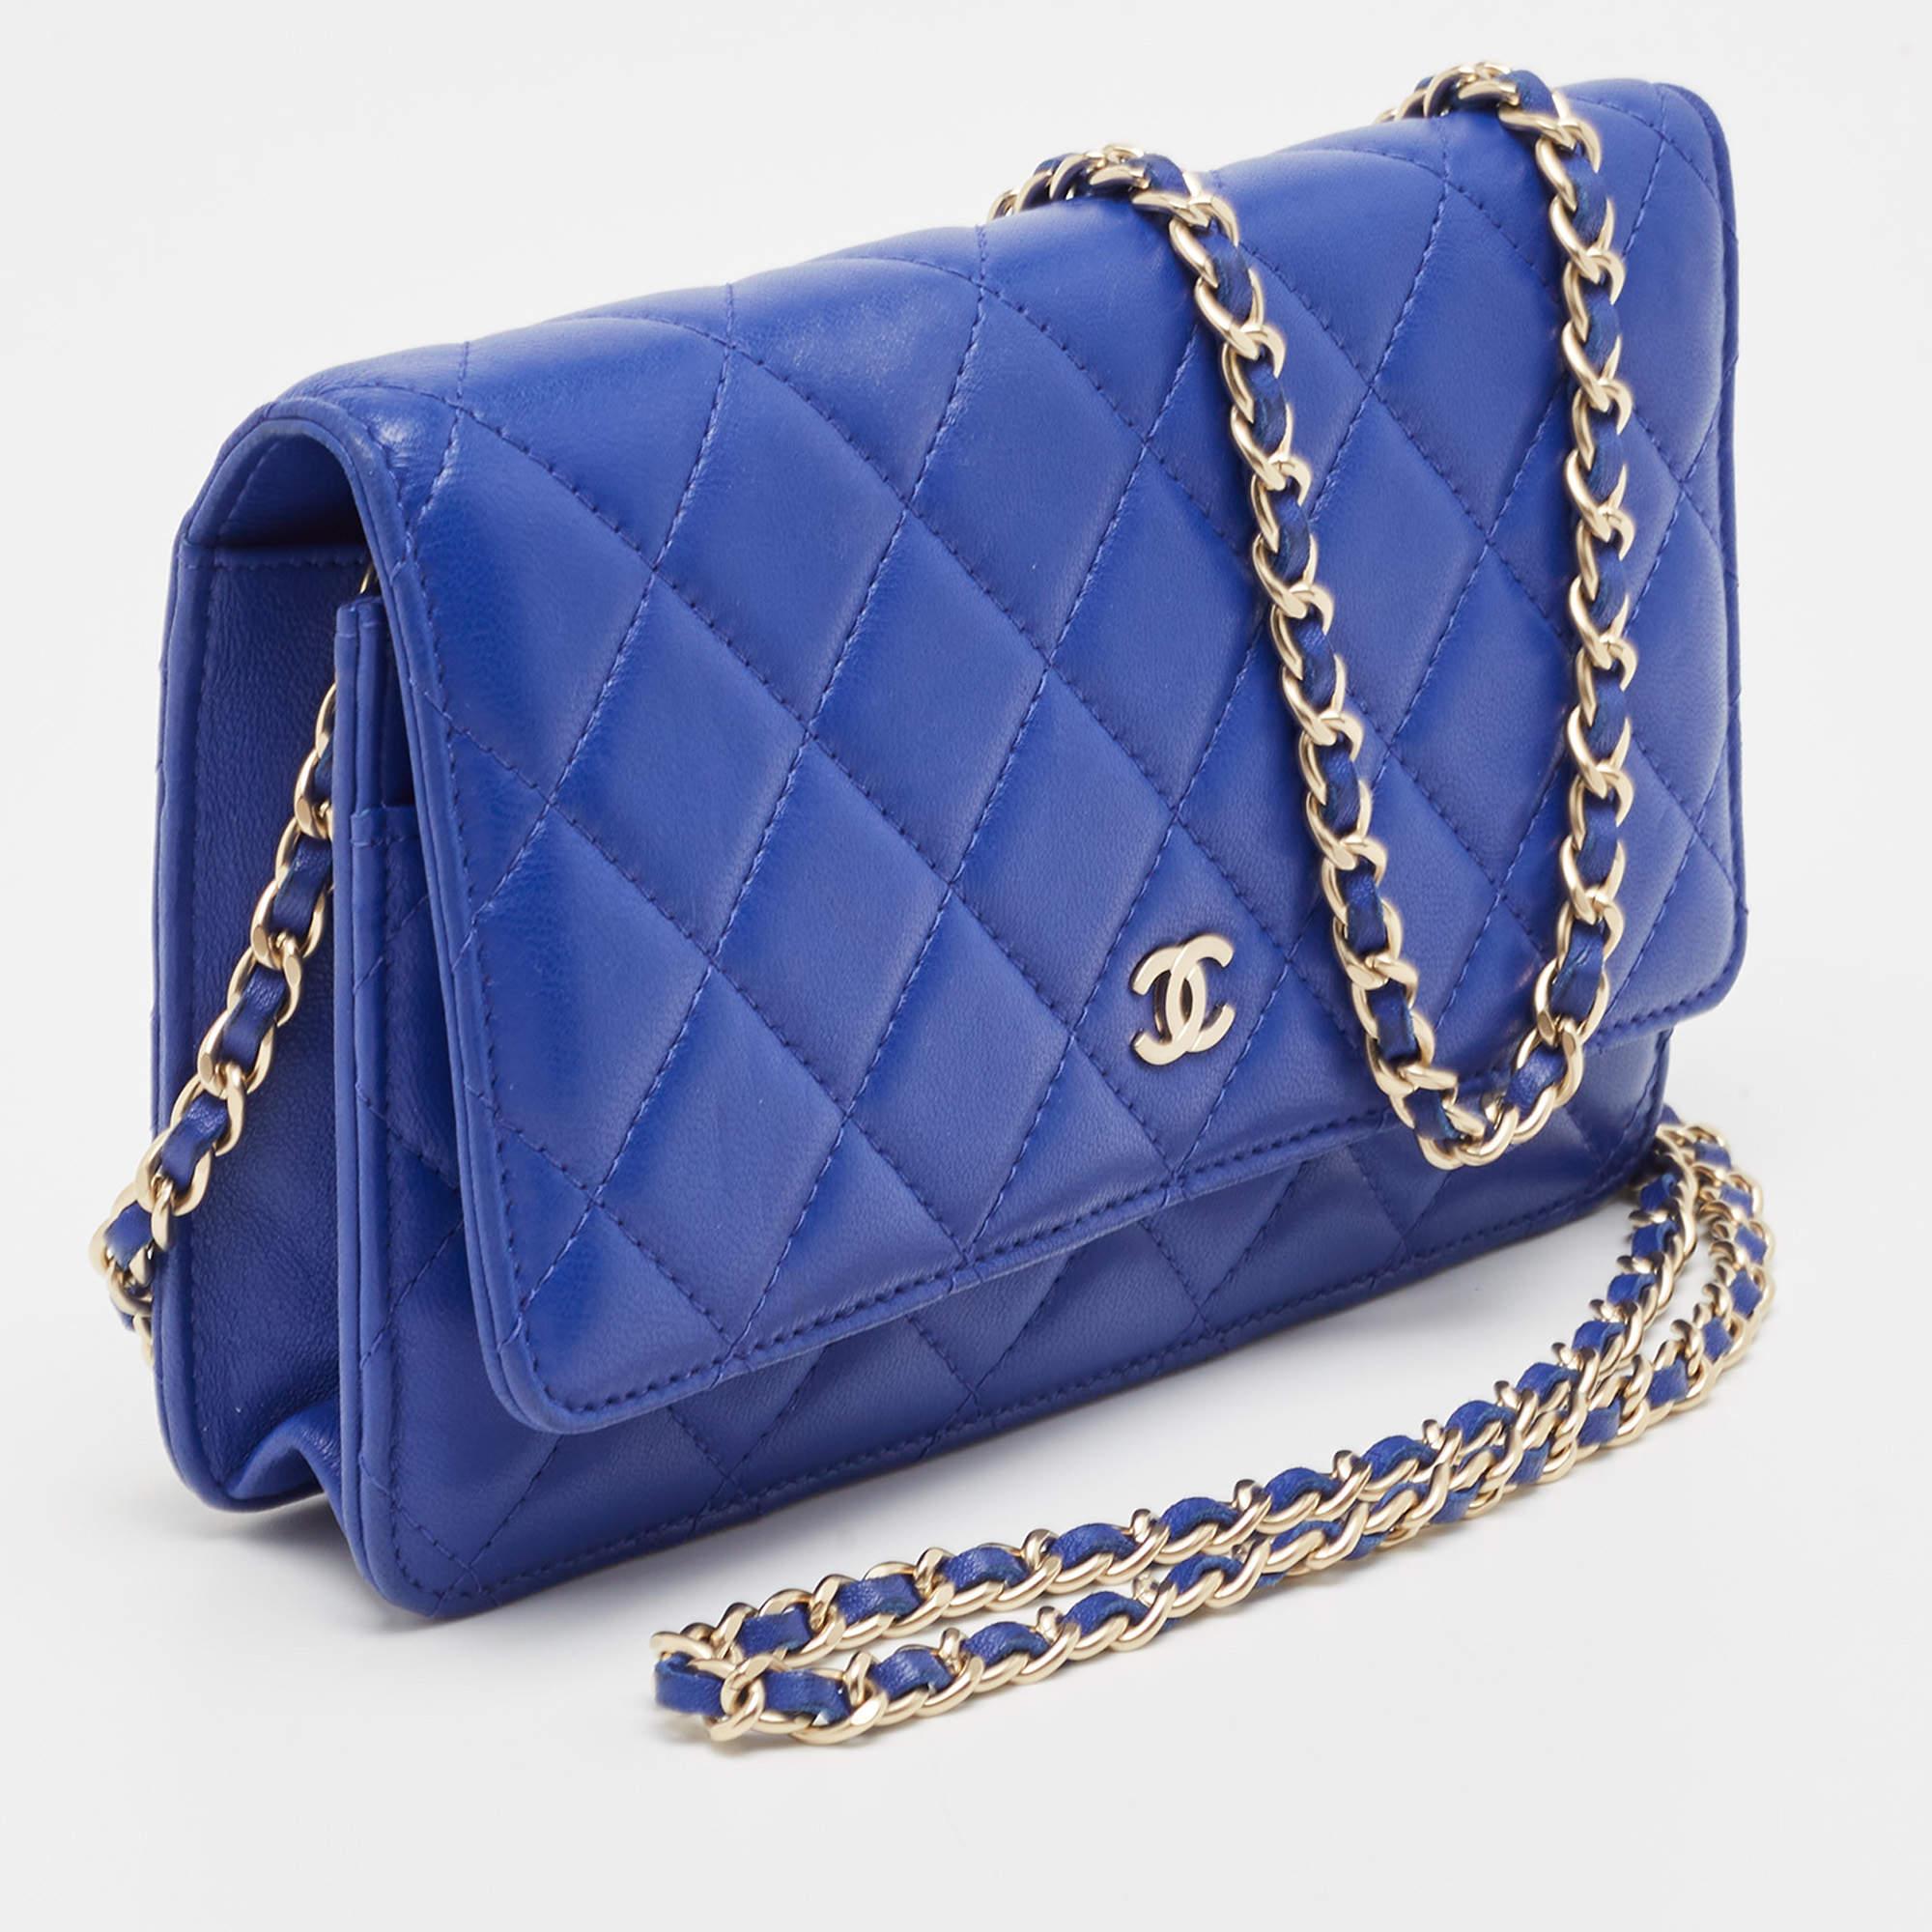 Women's Chanel Blue Quilted Leather Classic WOC Bag